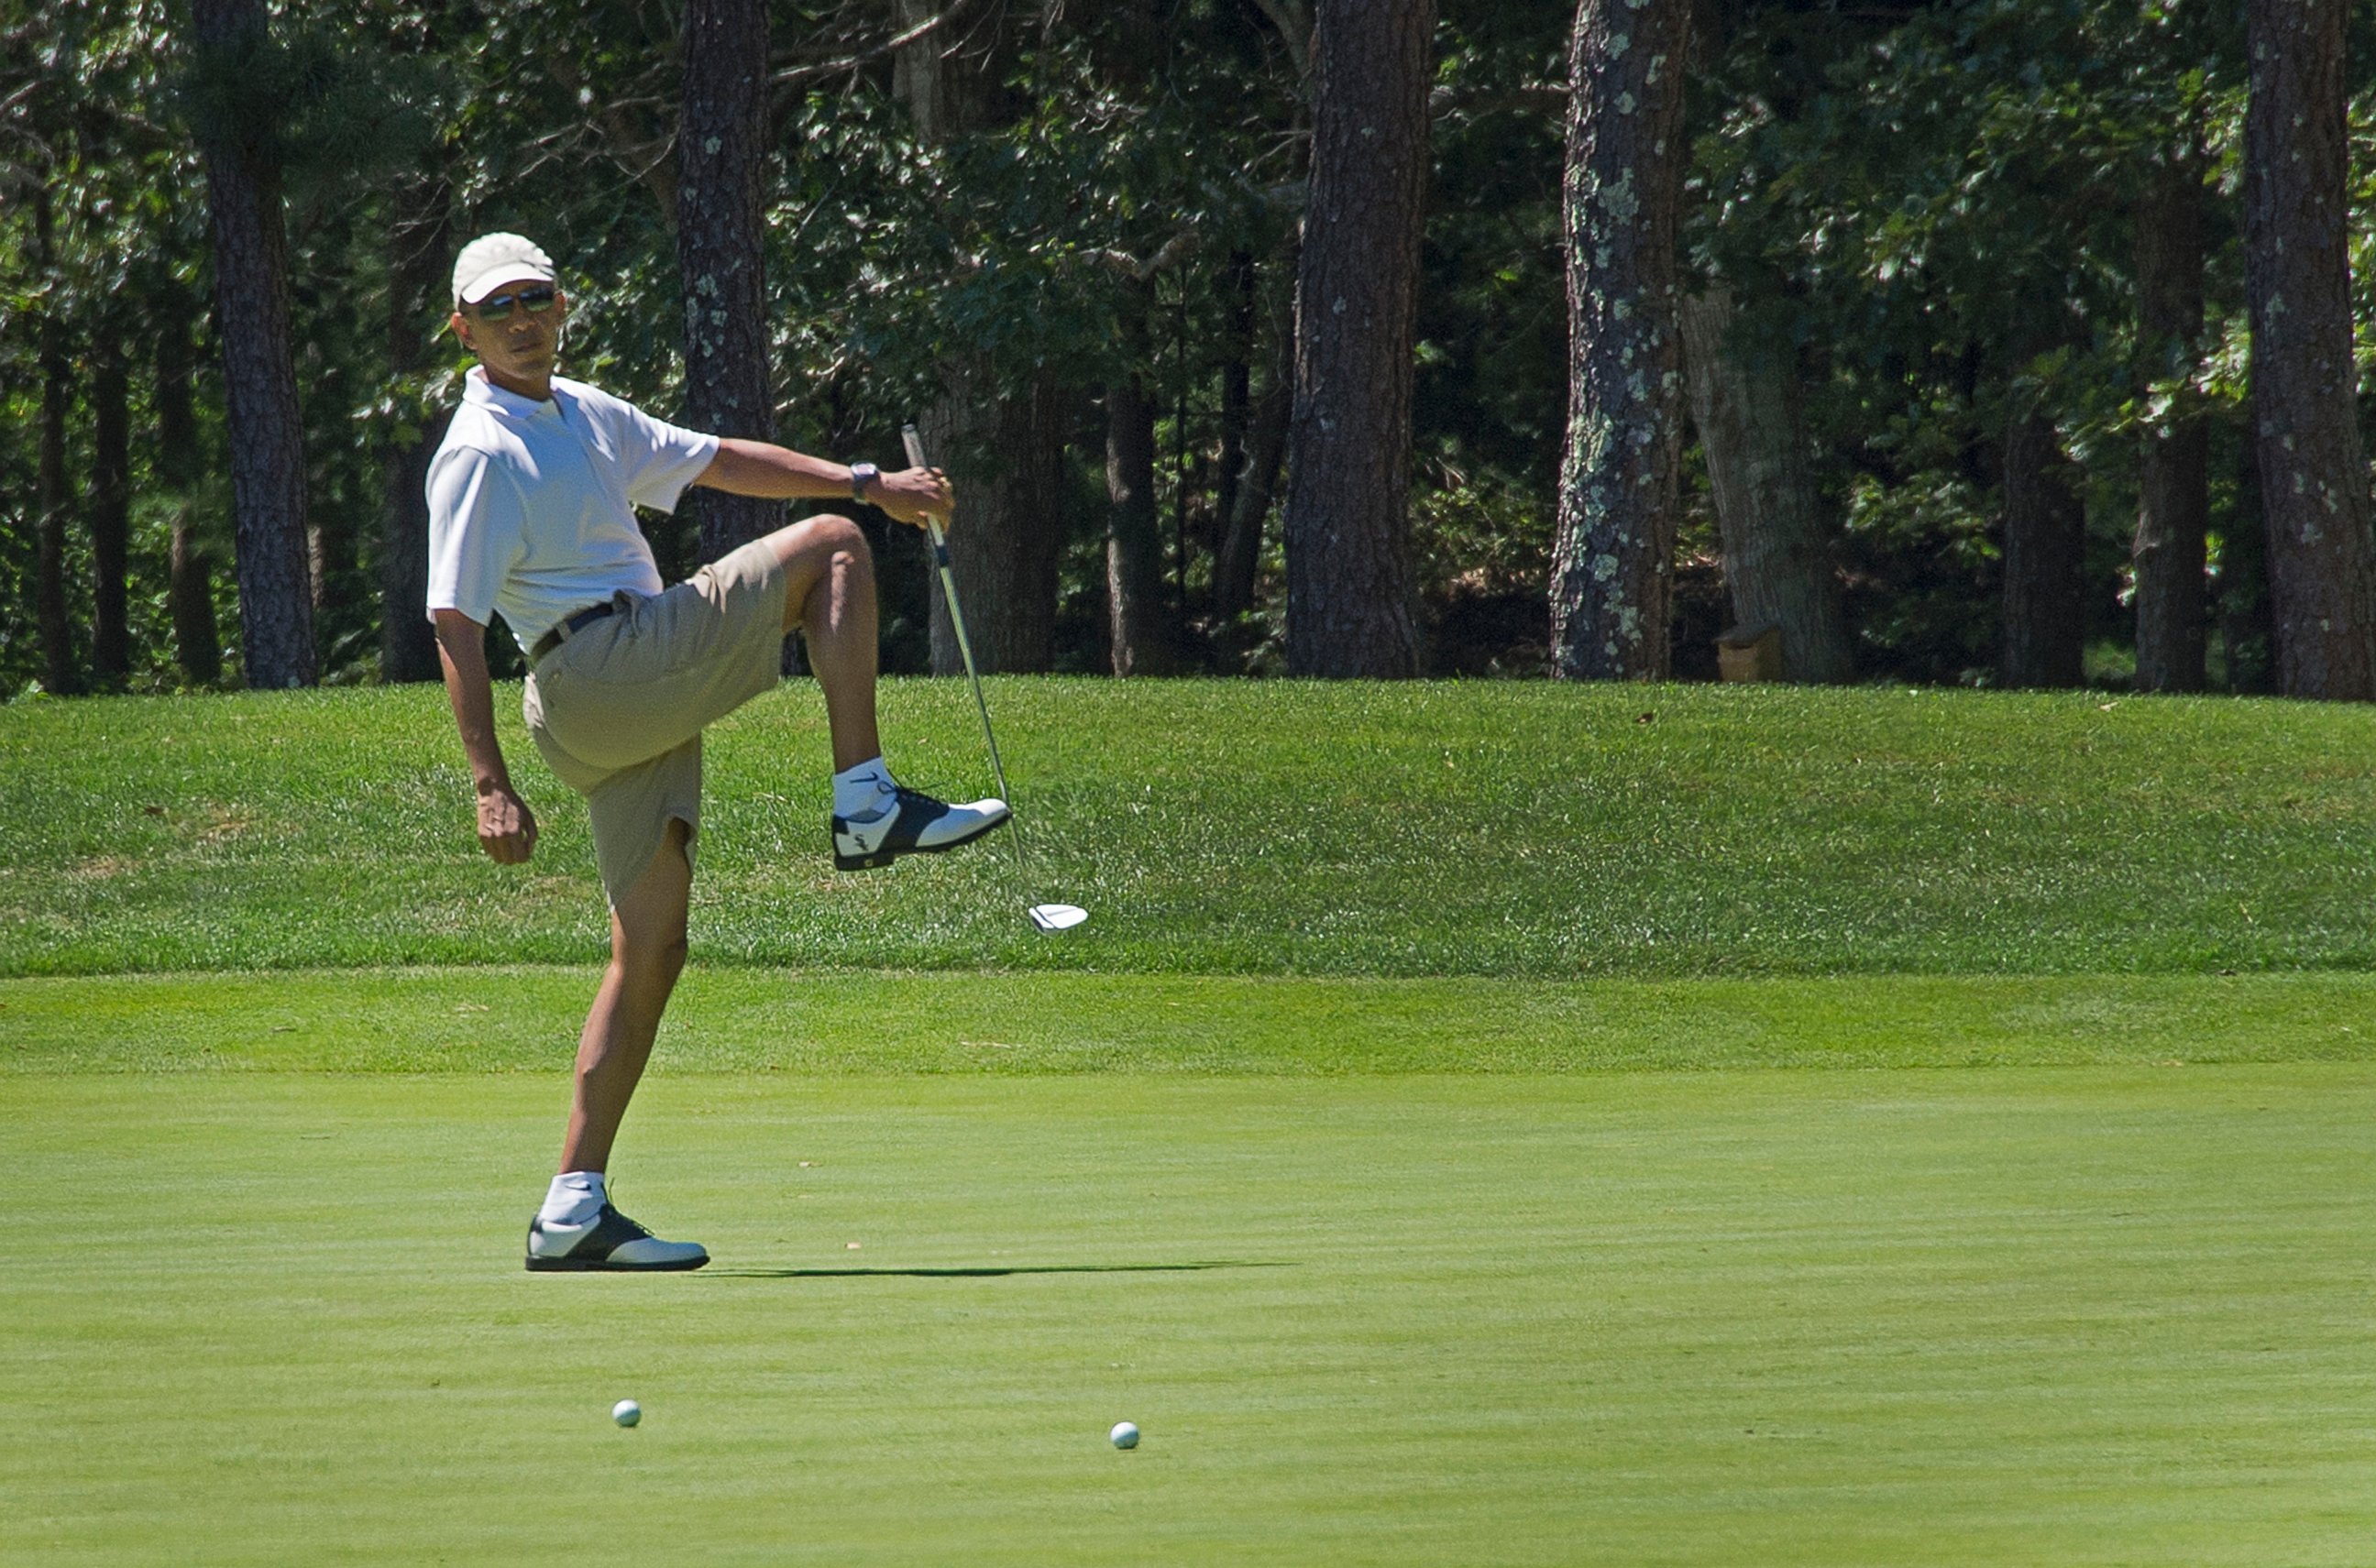 PHOTO: President Barack Obama reacts to a missed putt on the first green at Farm Neck Golf Club in Oak Bluffs, Mass. on August 11, 2013 during the Obama family vacation to Martha's Vineyard.